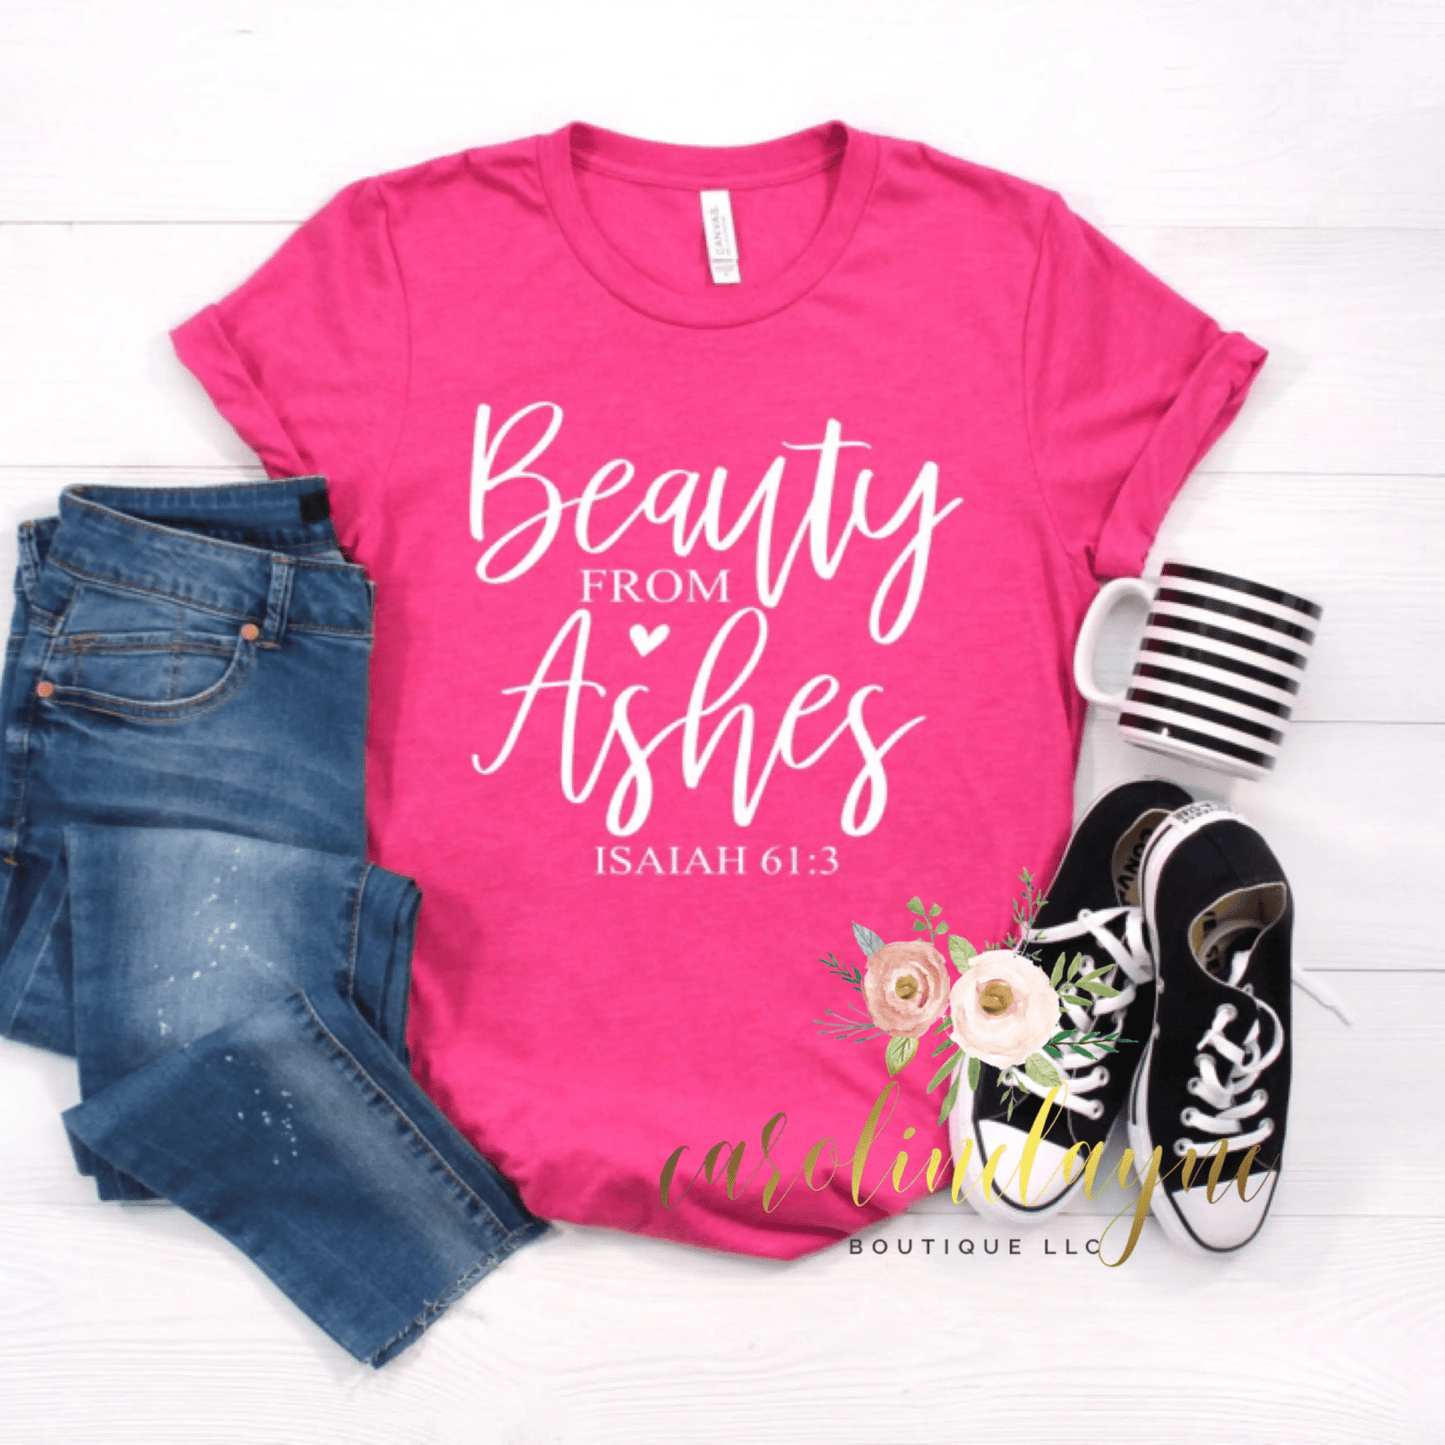 Beauty from the ashes Tee - Caroline Layne Boutique LLC